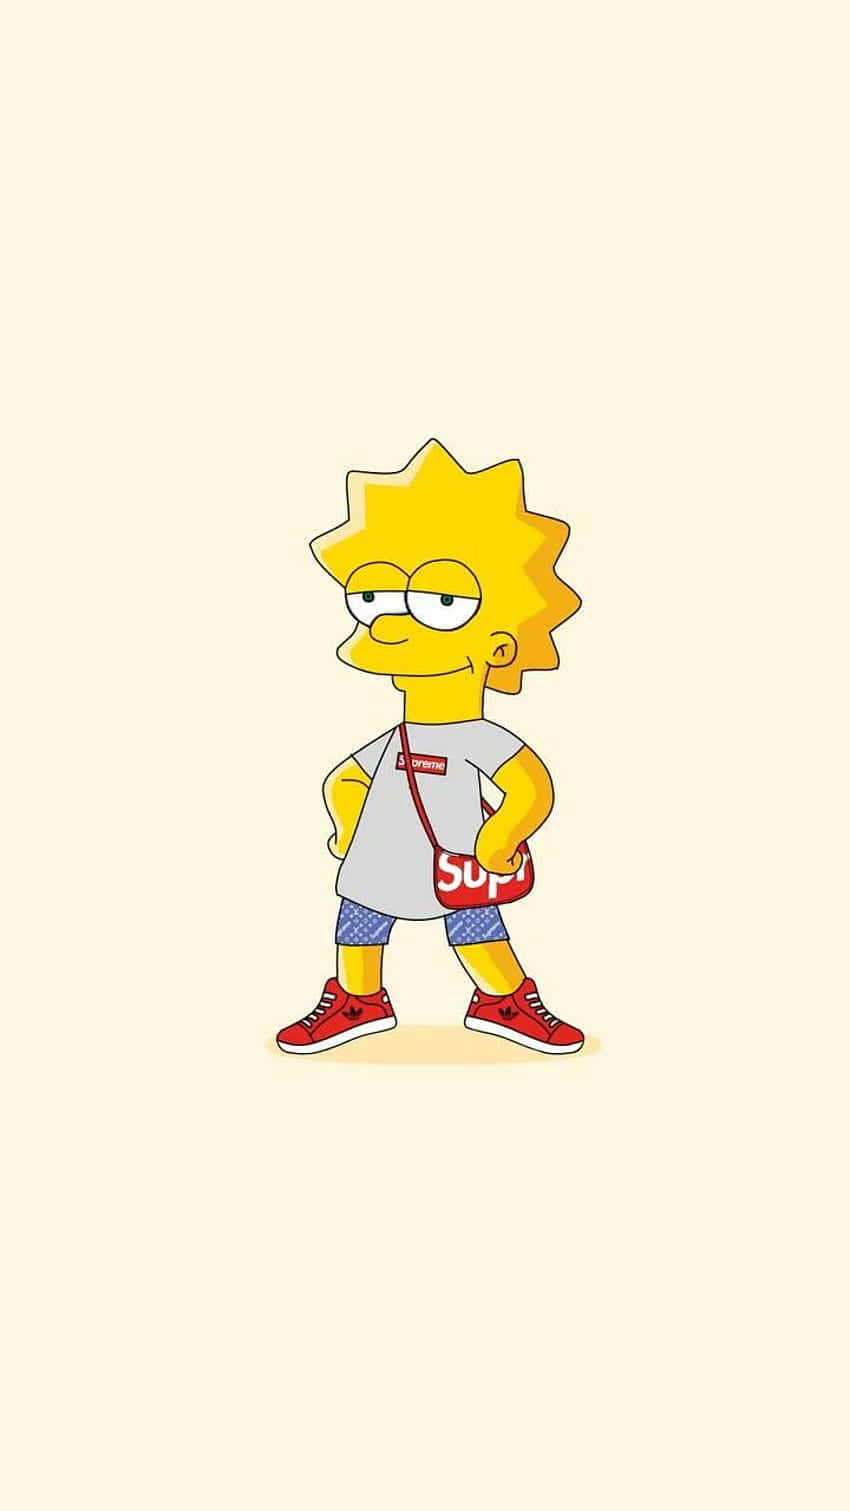 Cool Lisa Simpson Stylish Outfit Wallpaper